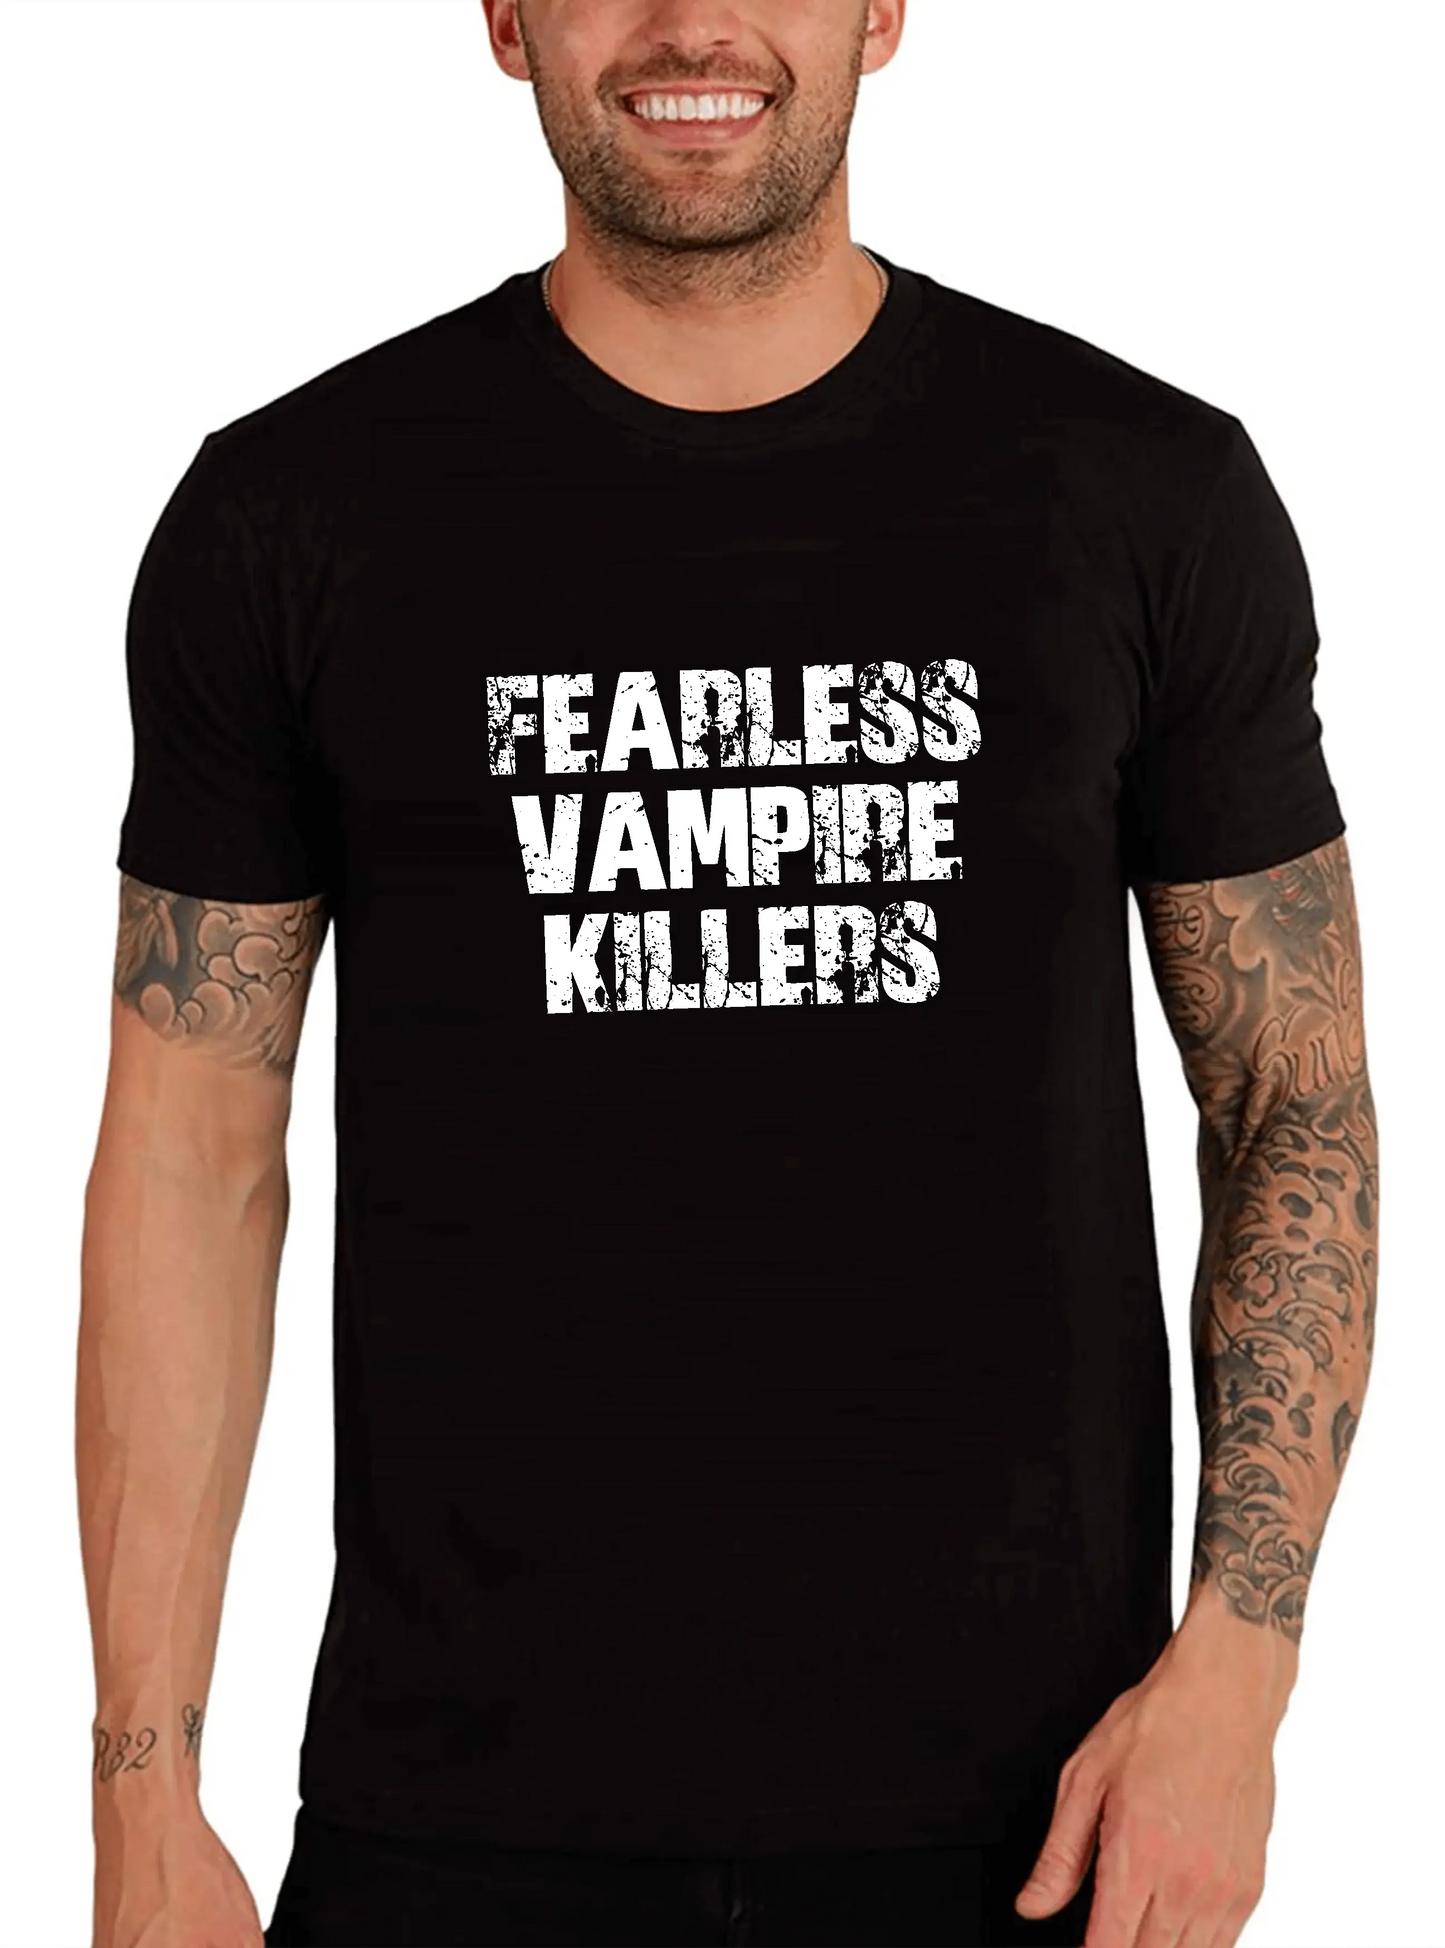 Men's Graphic T-Shirt Fearless Vampire Killers Eco-Friendly Limited Edition Short Sleeve Tee-Shirt Vintage Birthday Gift Novelty